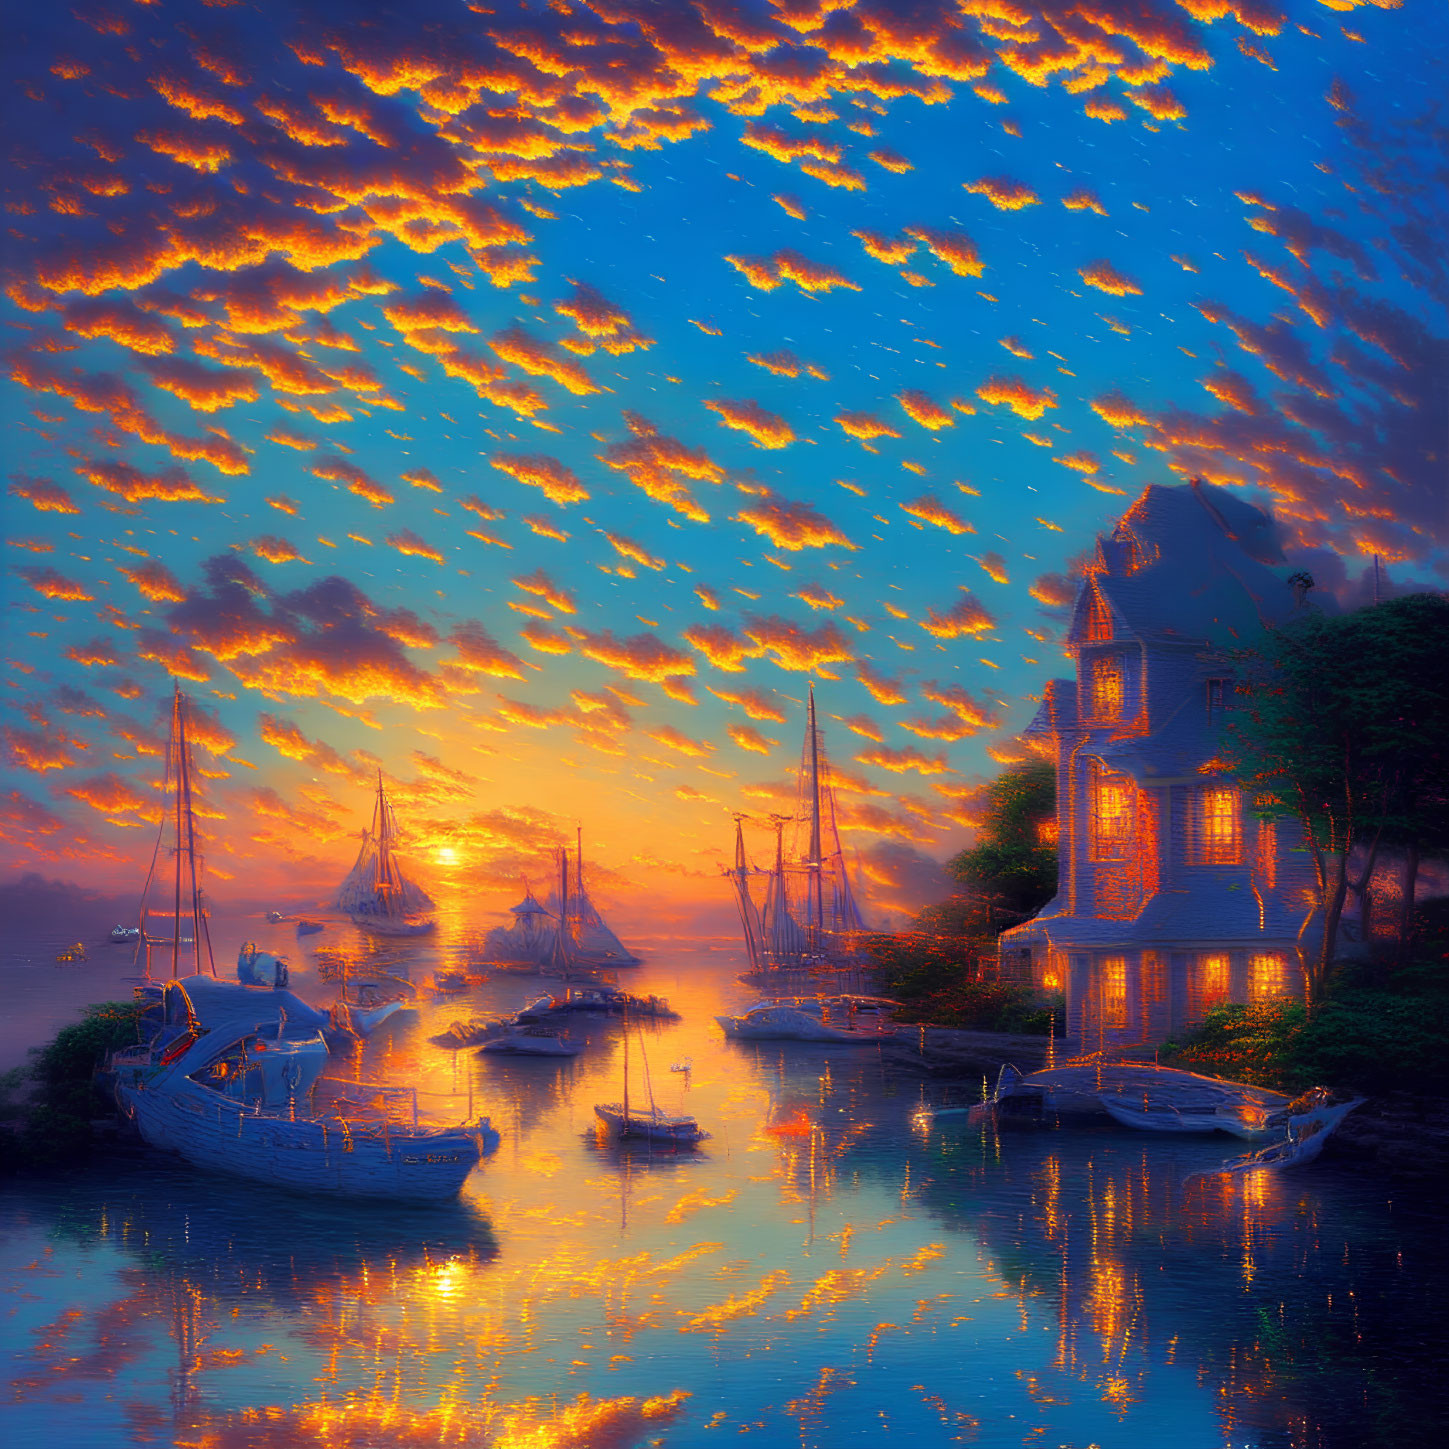 Tranquil harbor scene at sunset with moored boats and grand house against vibrant sky.